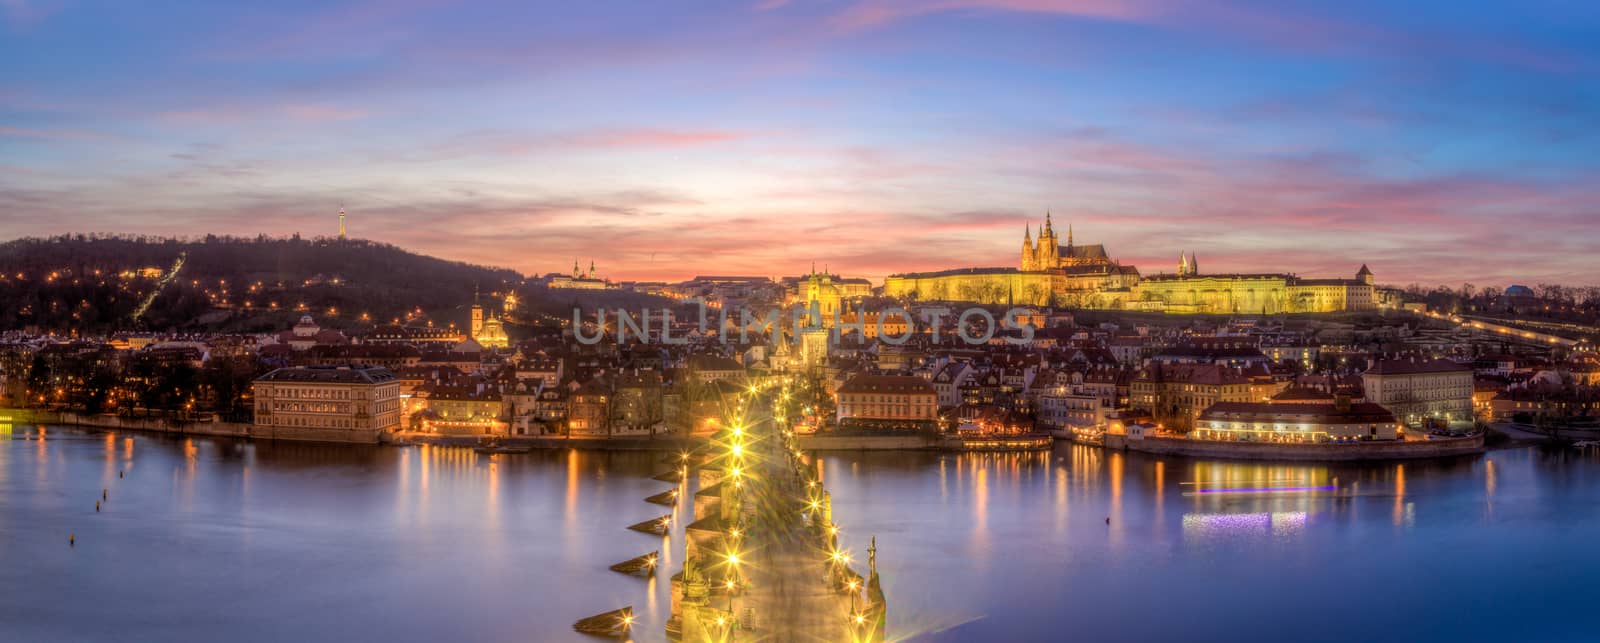 Prague, Czech Republic - March 16, 2017: Evening panorama of Prague Castle and Charles Bridge from the Old Town Bridge Tower